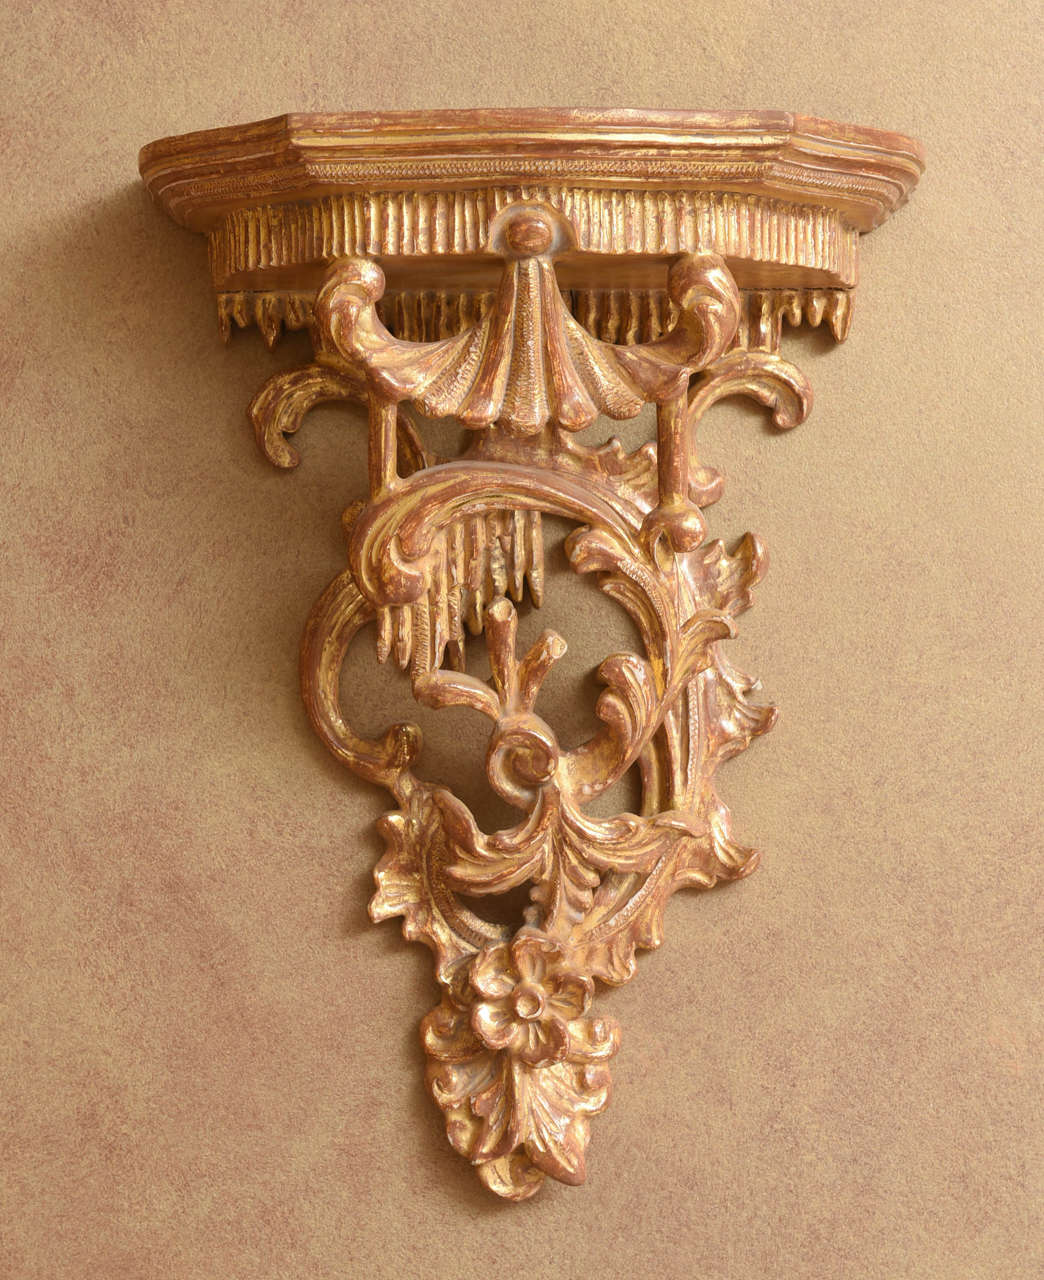 Each fancifully carved with a chinoiserie pagoda over foliate C-scrolls and floral sprays.  A true pair with the decoration in reverse on the other.